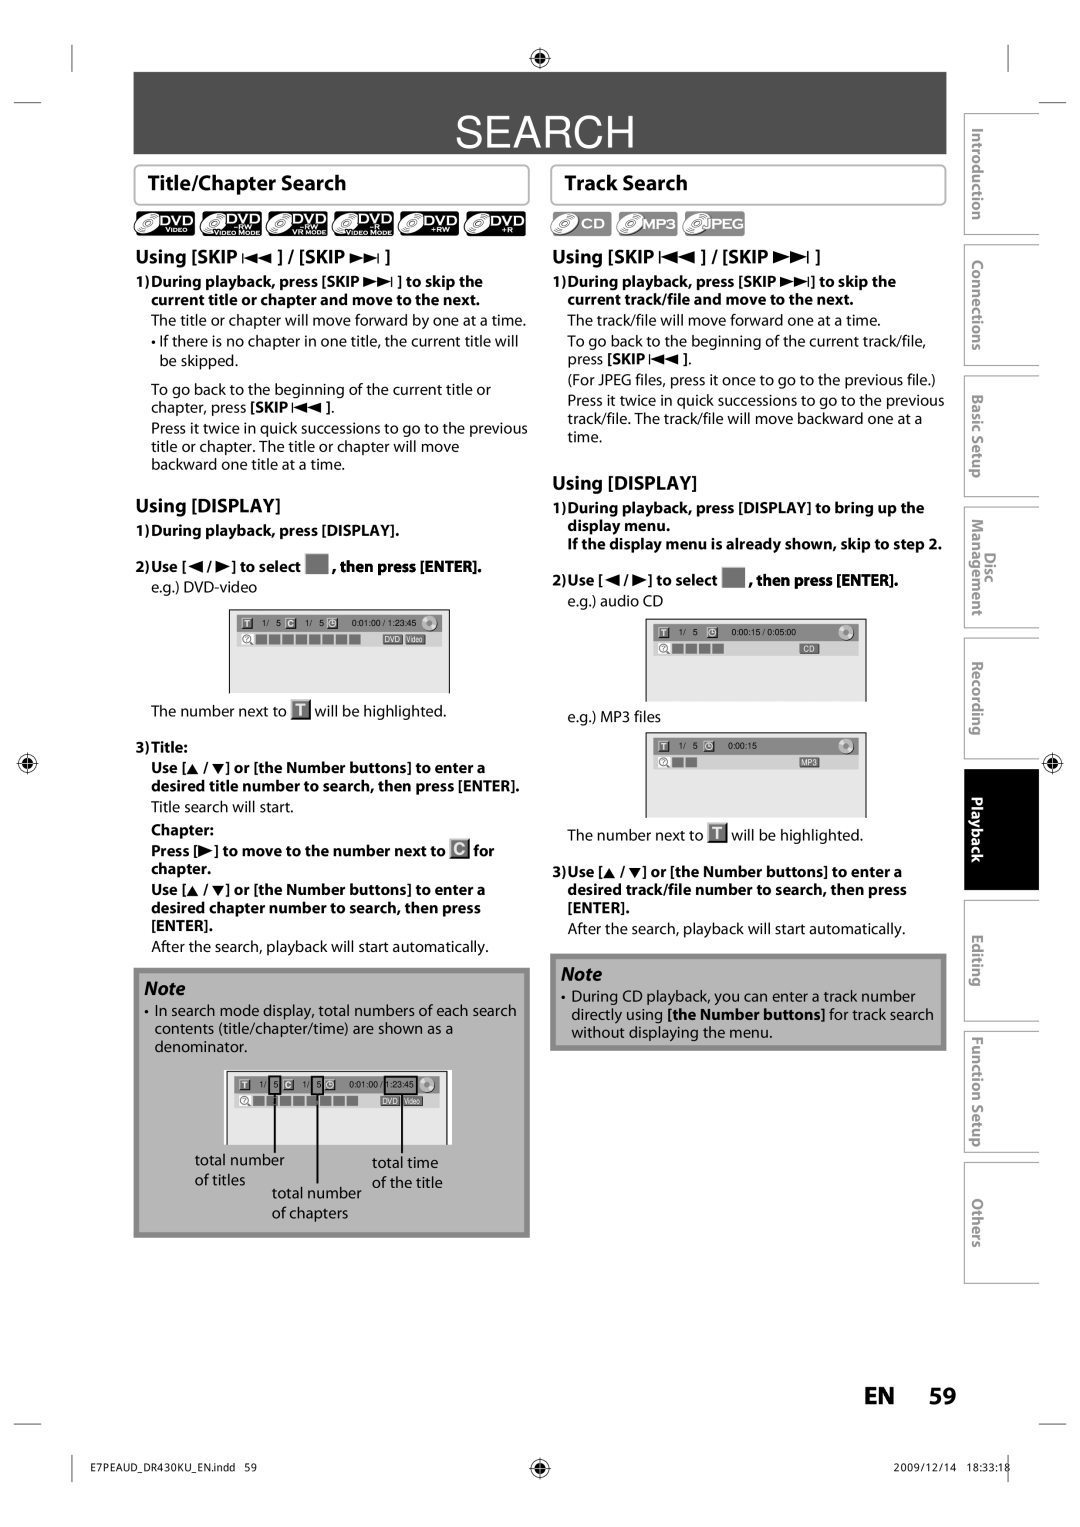 Toshiba DR430 owner manual Title/Chapter Search, Using Skip j / Skip, Using Display 